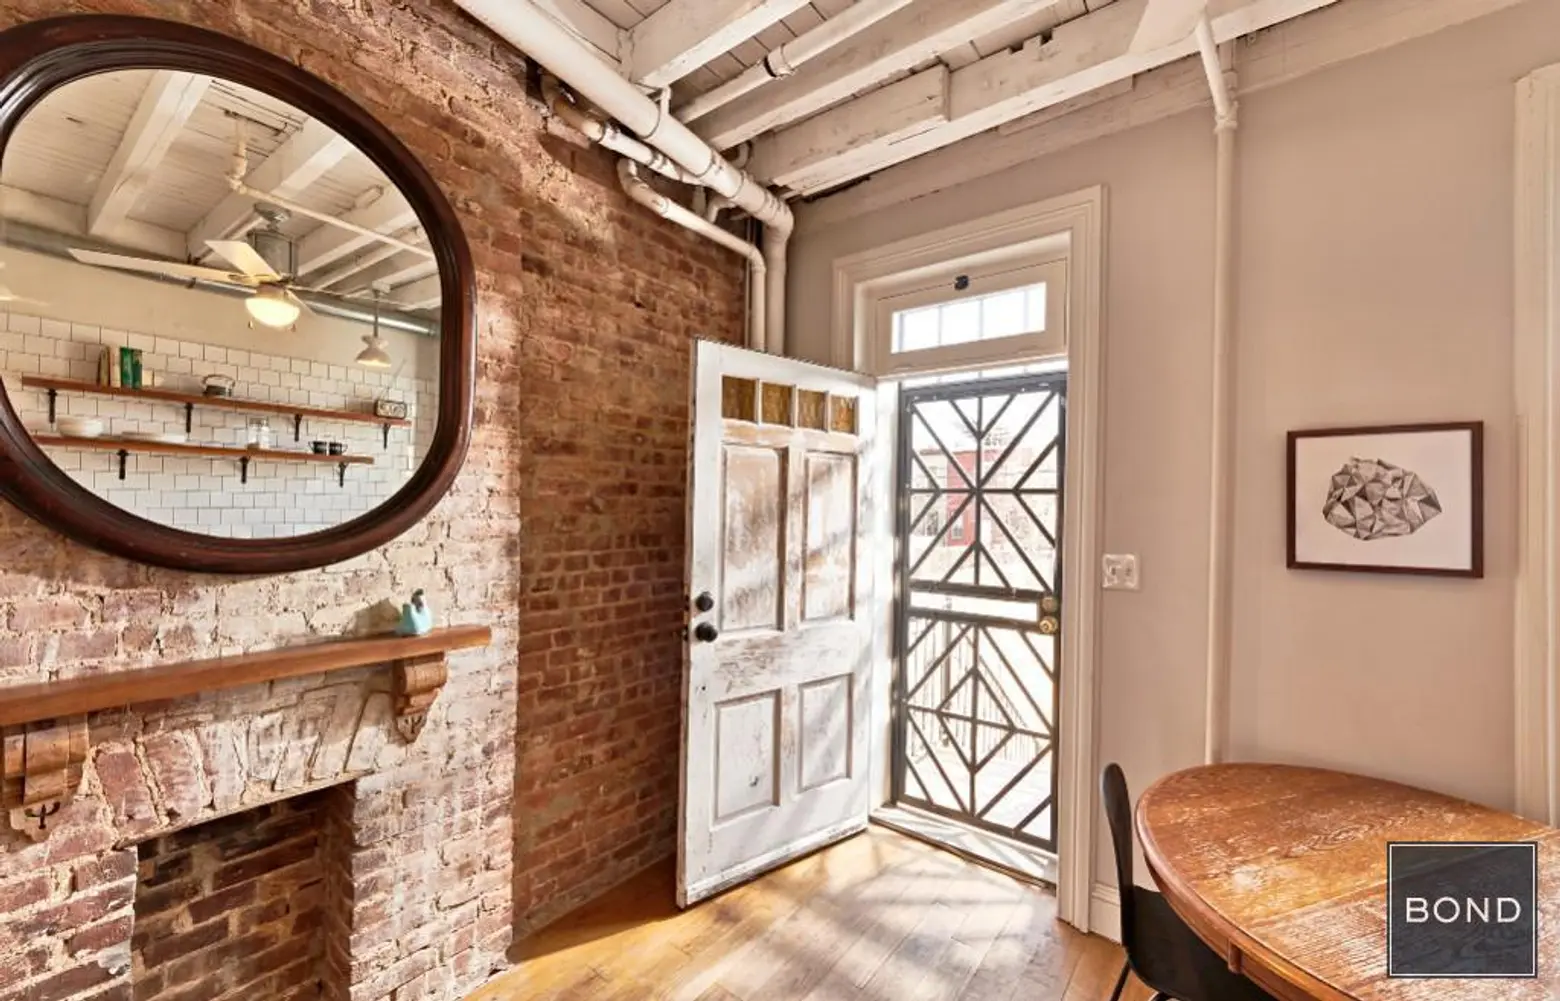 For only $950K, this tiny townhouse in Stuyvesant Heights has a backyard shed and modern updates